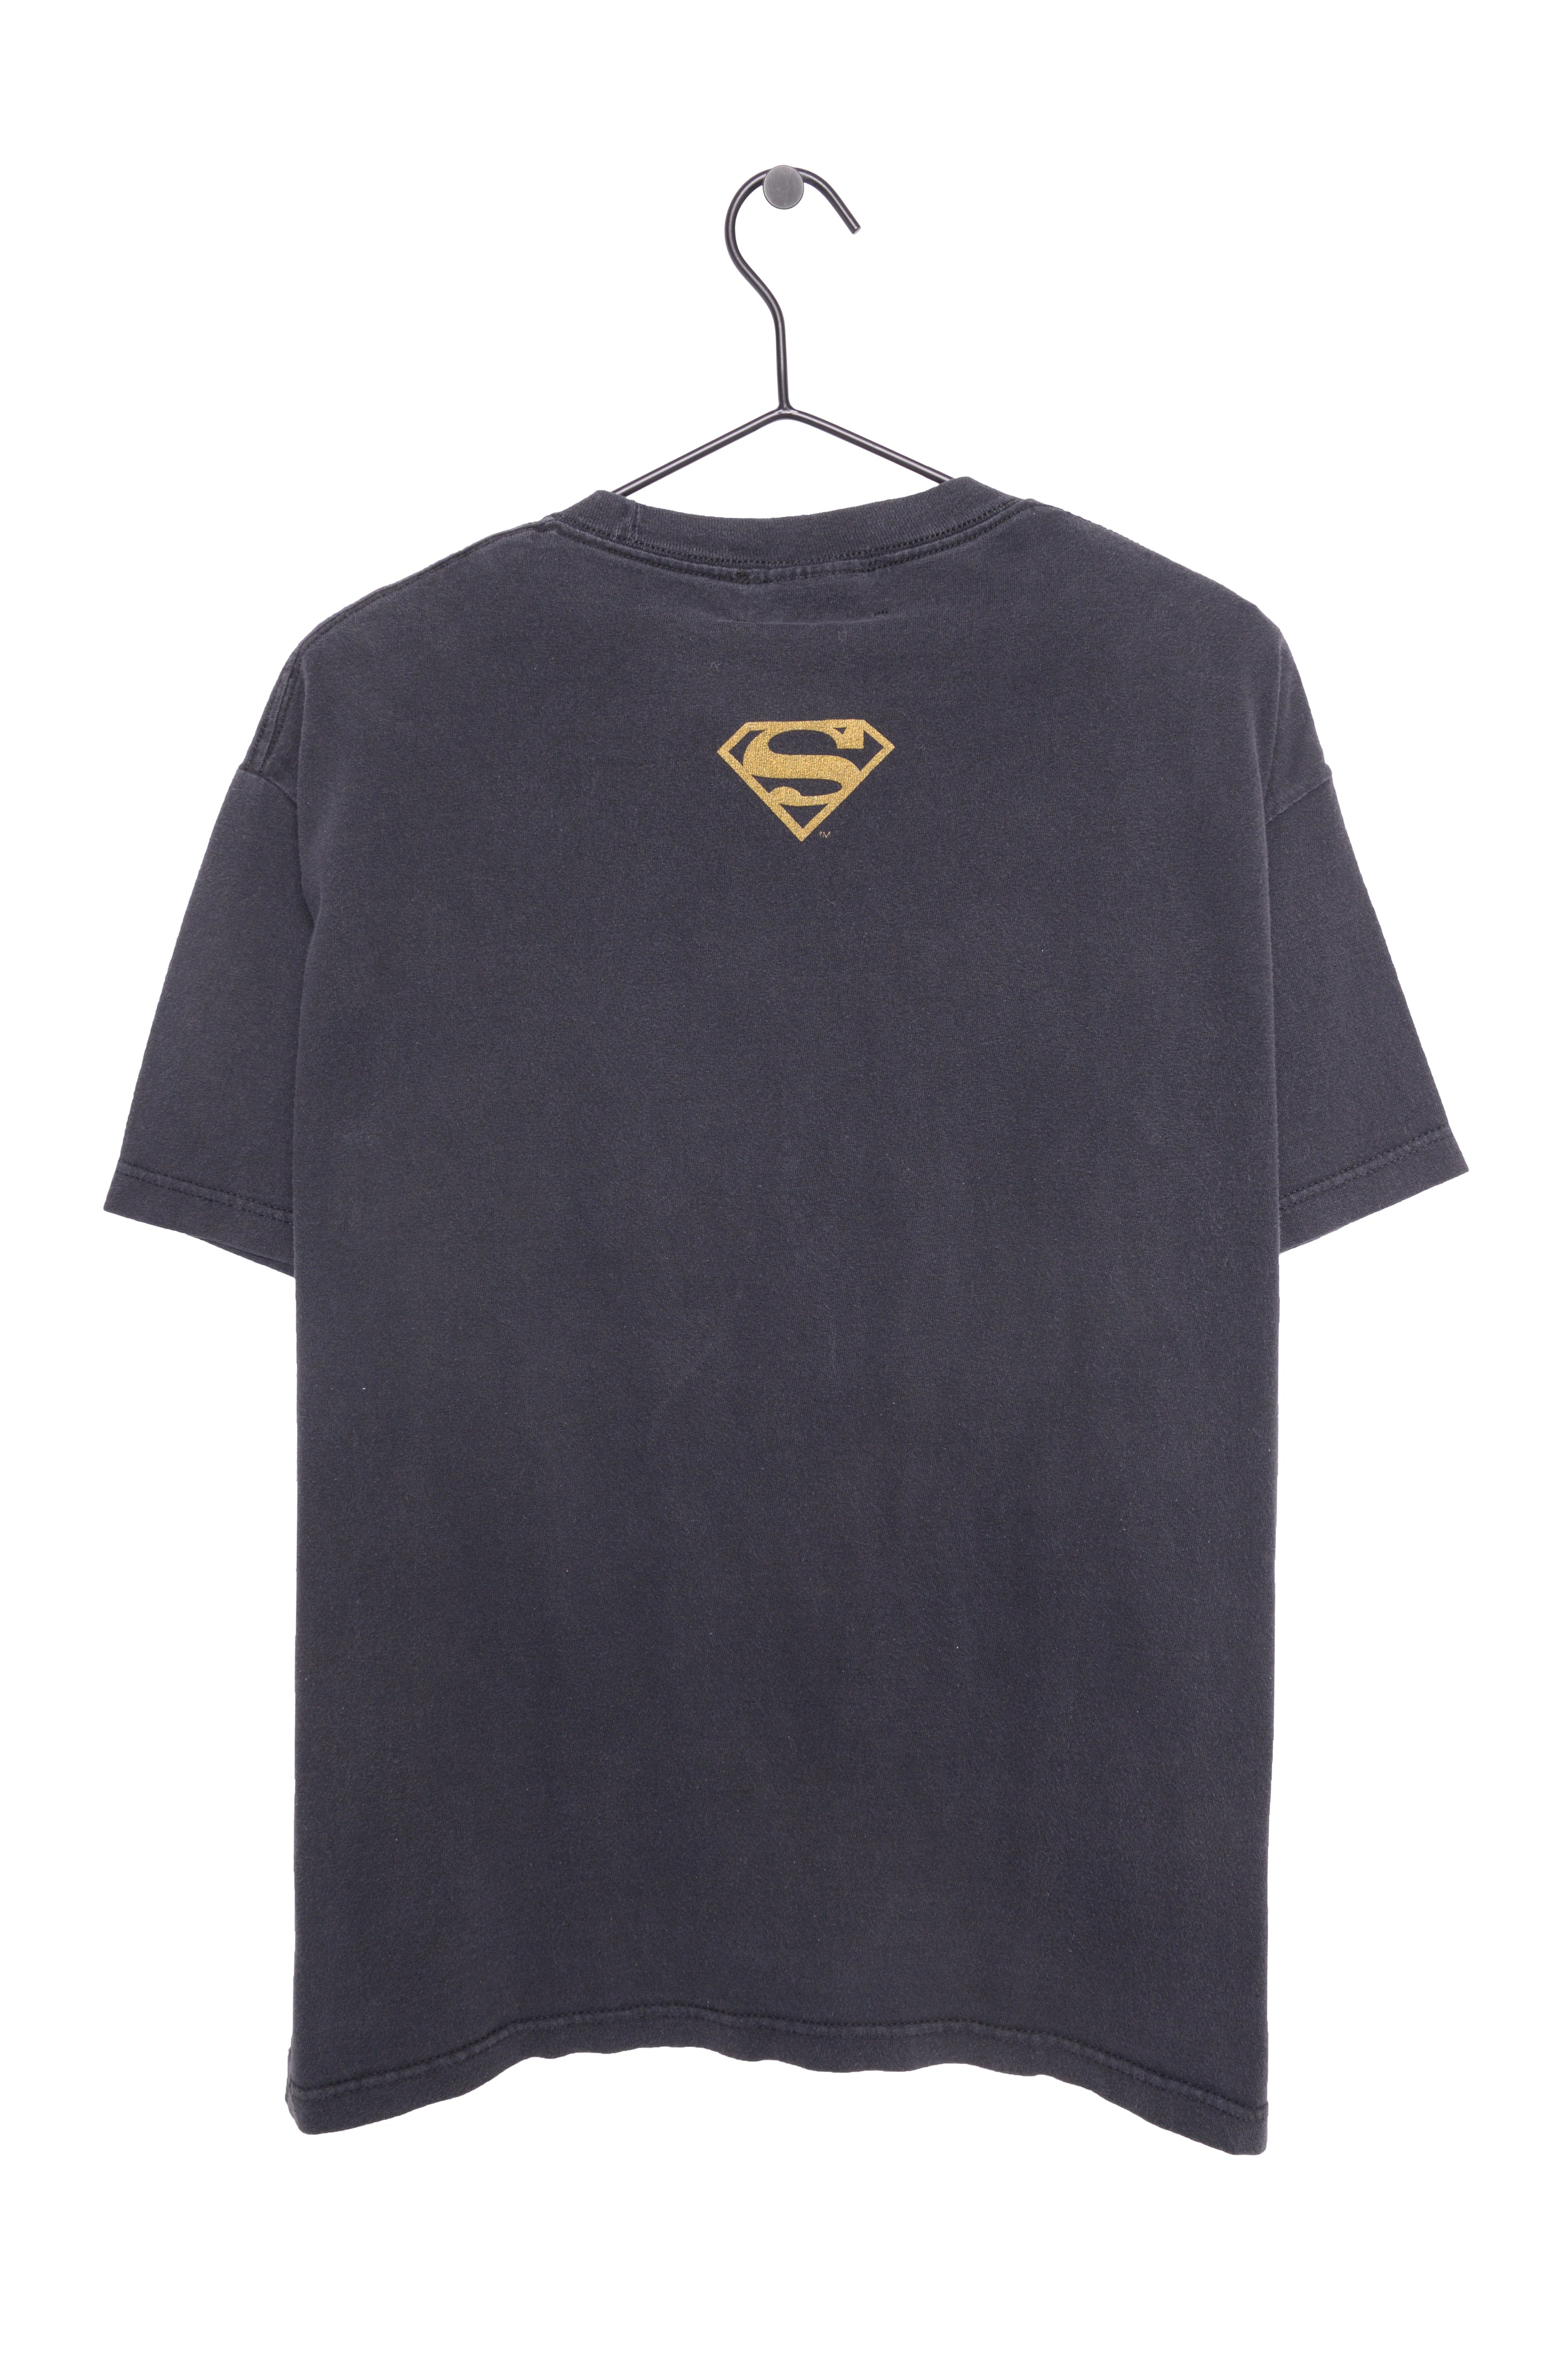 1996 Faded Superman Gold Tee – The Vintage Twin